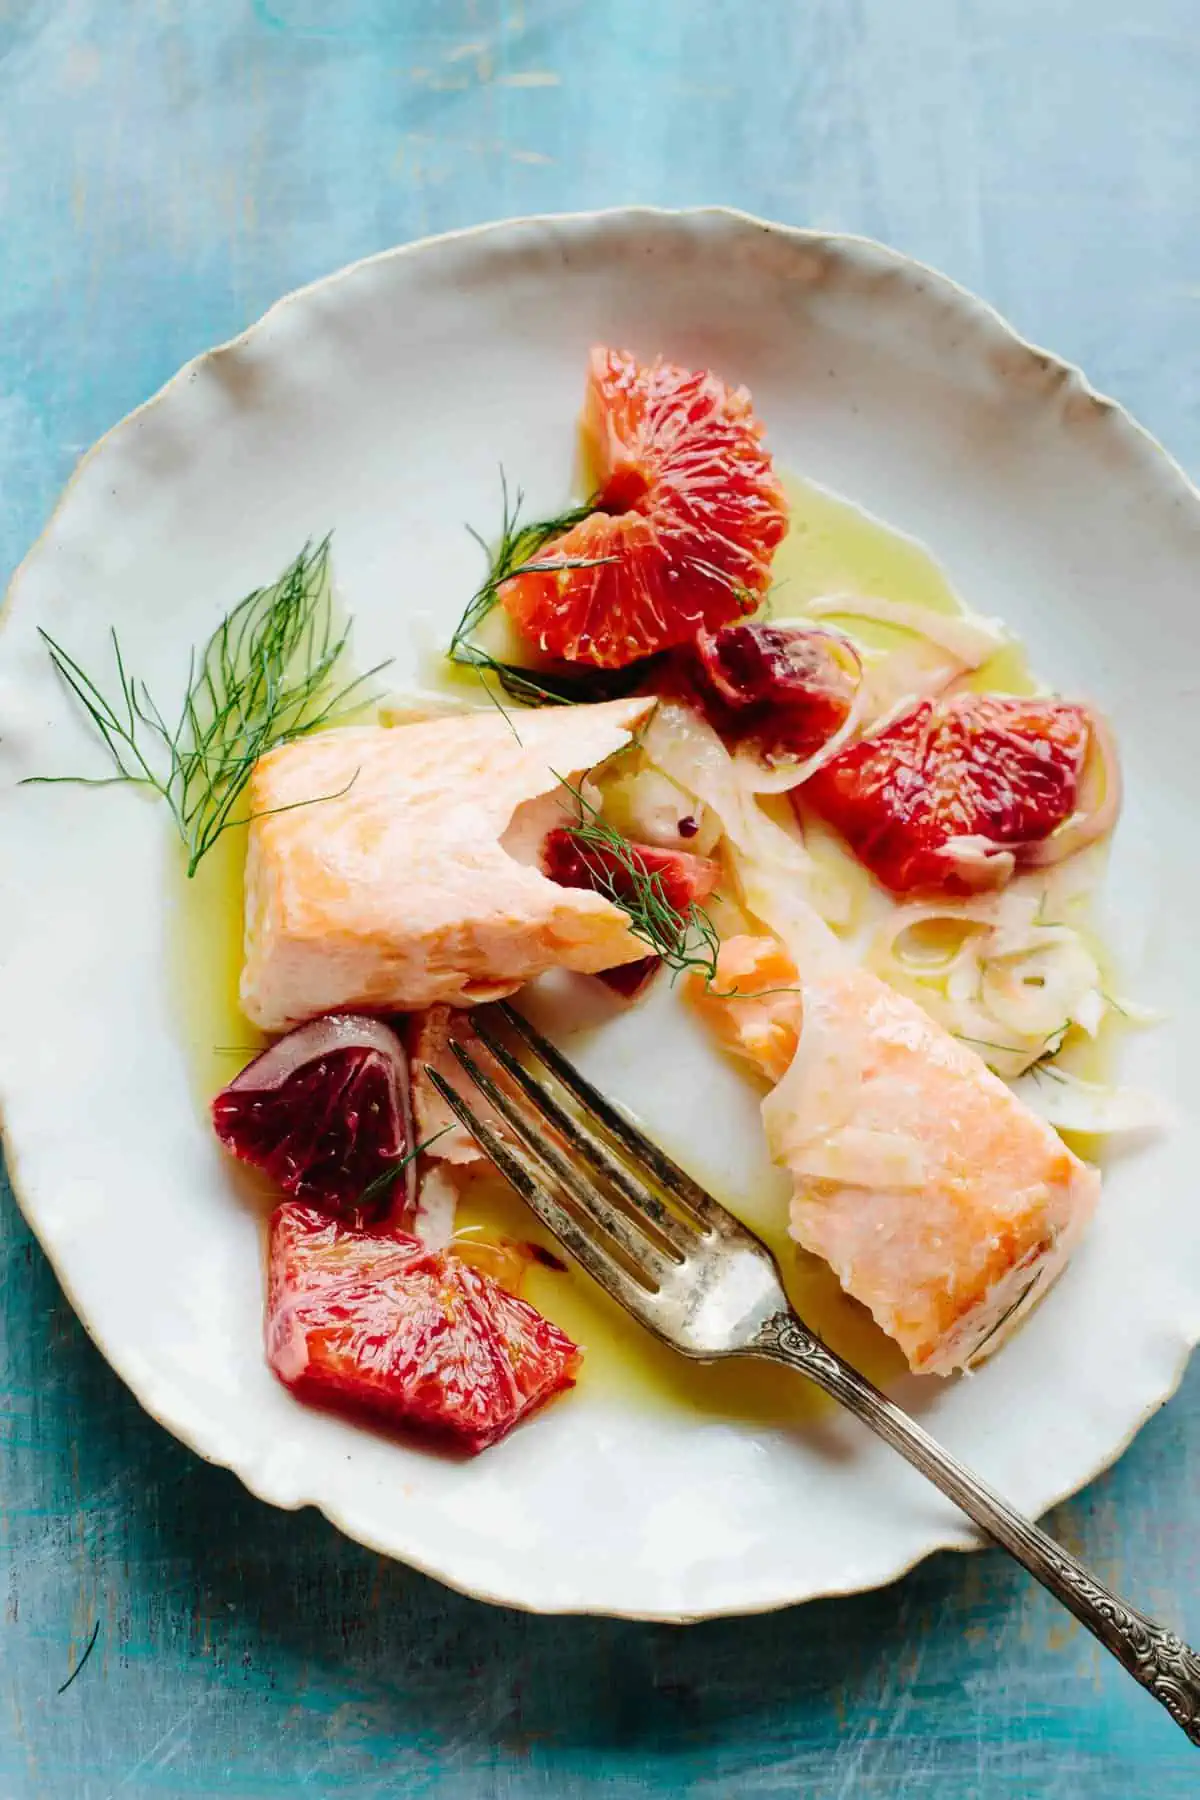 Top view of a salmon fillet flaked in two surrounded by citrus slices, dill, and oil.